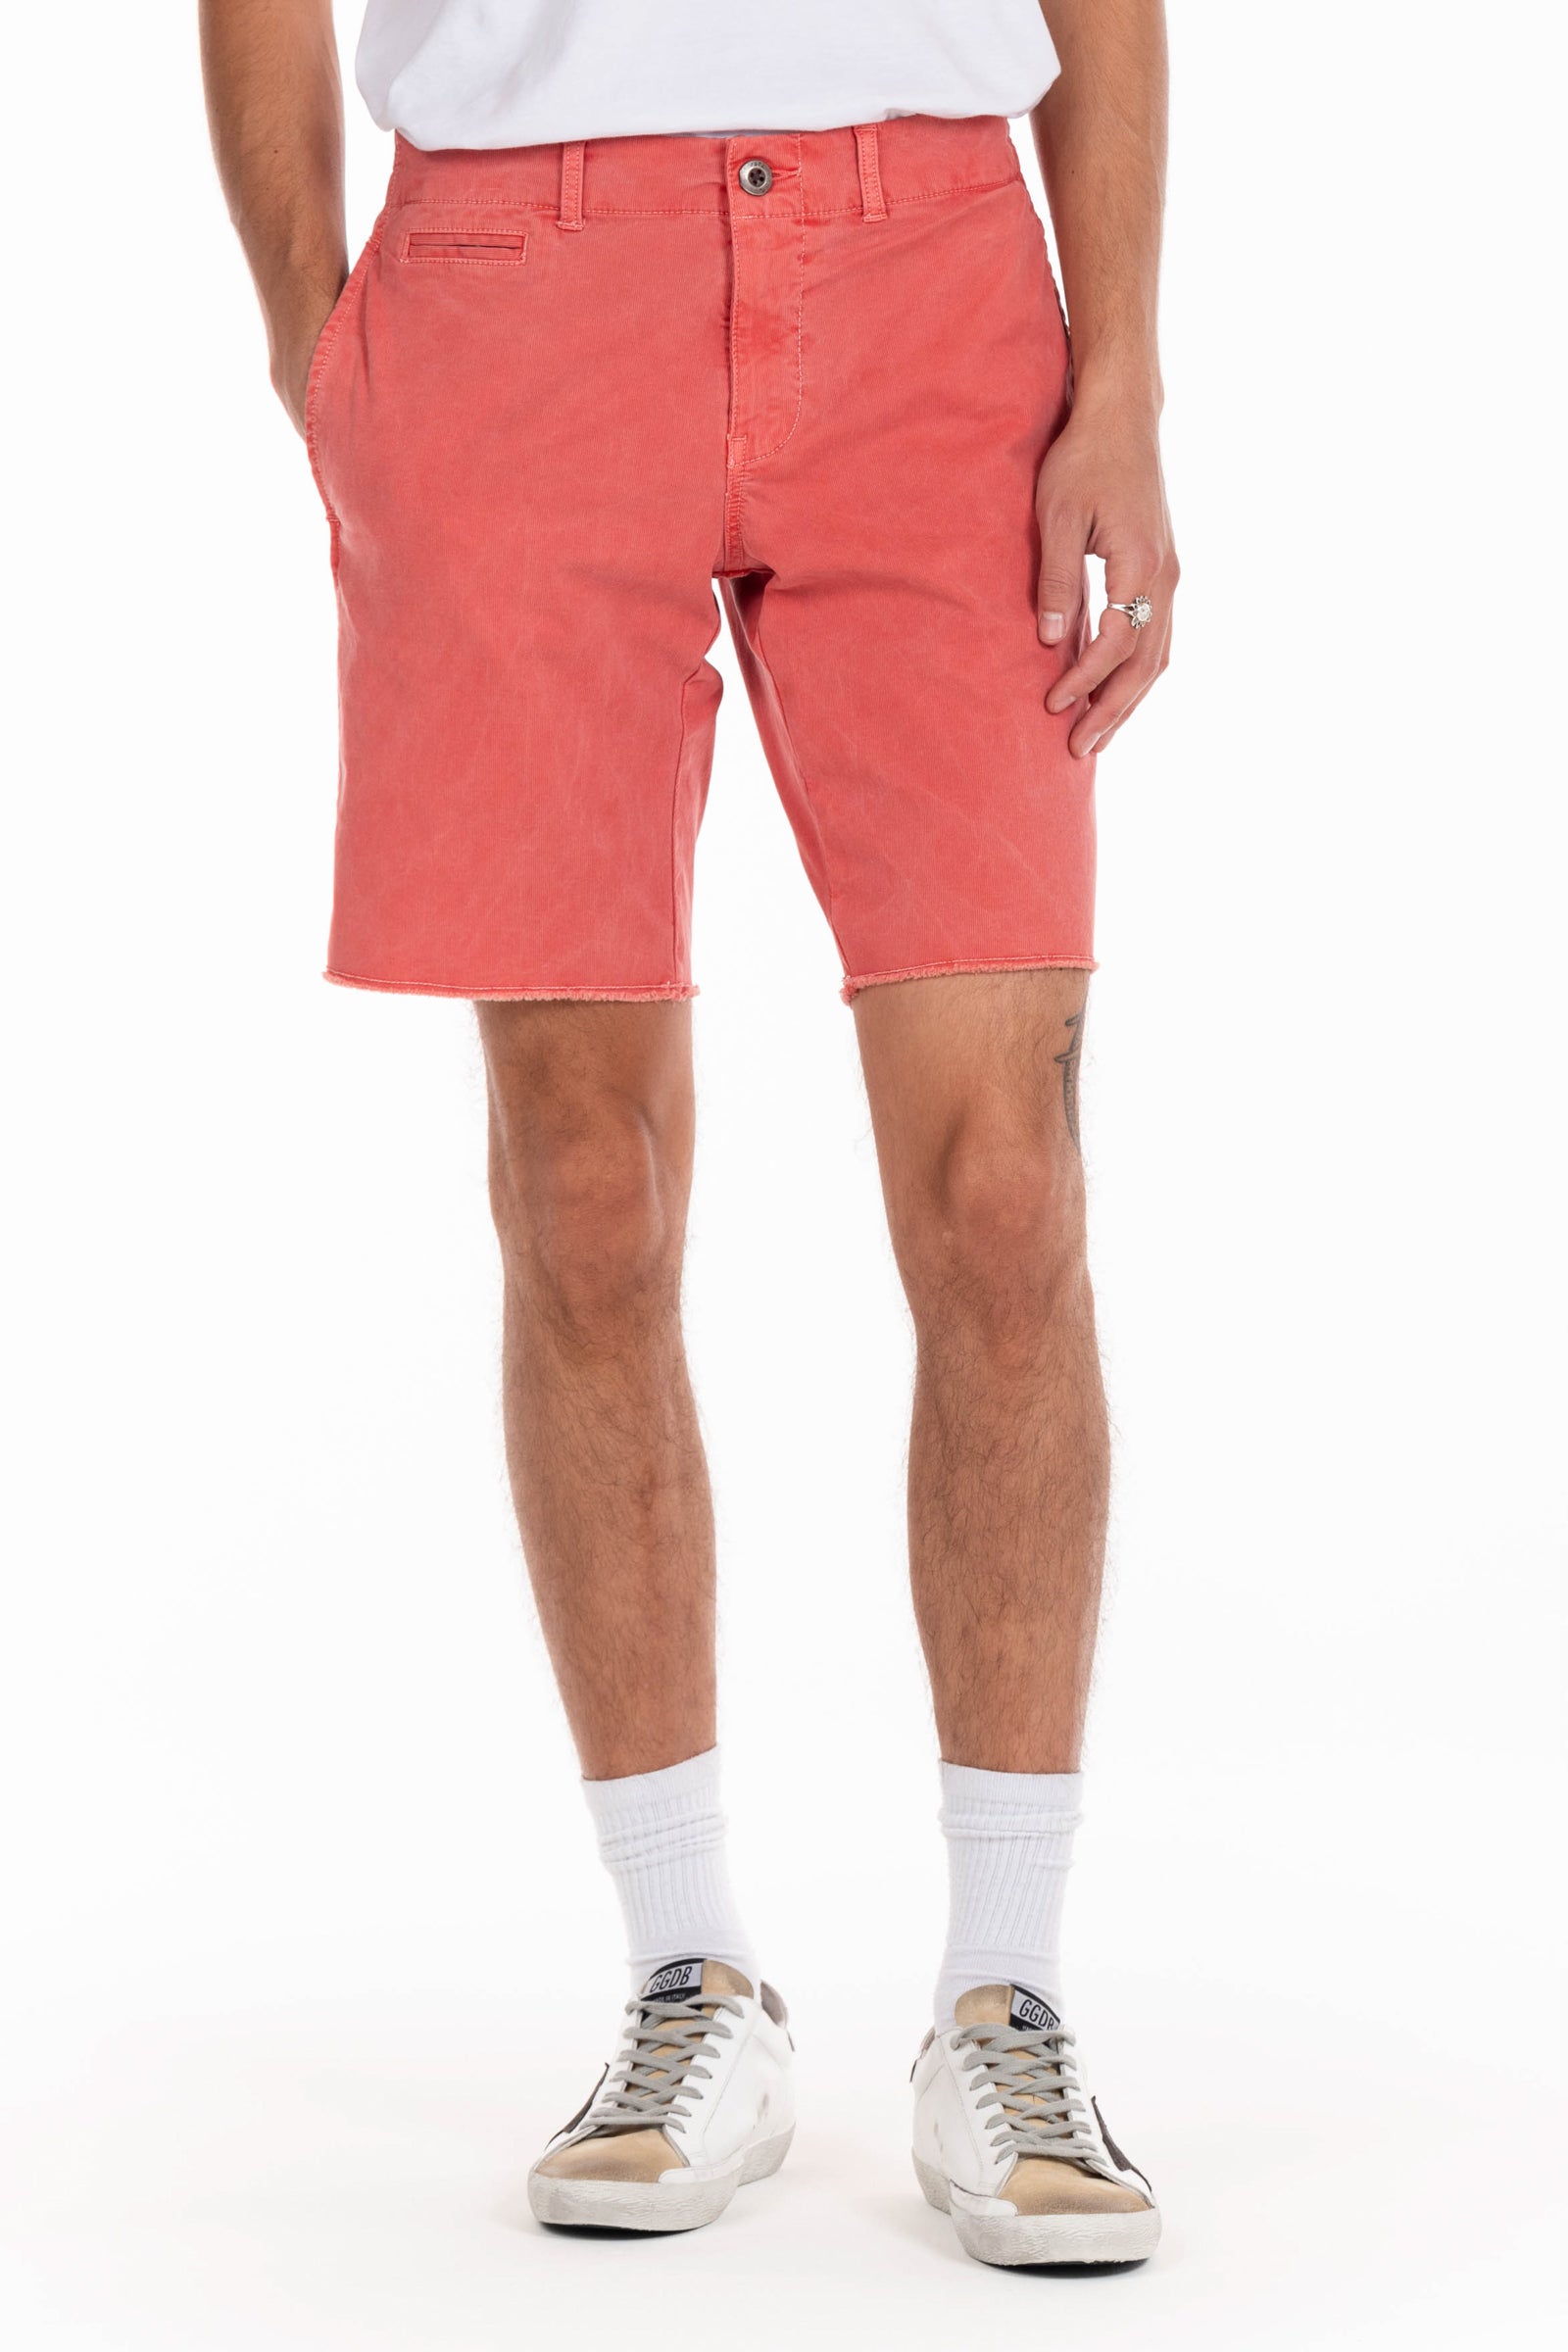 Original Paperbacks Rockland Chino Short in Persimmon on Model Cropped Styled View